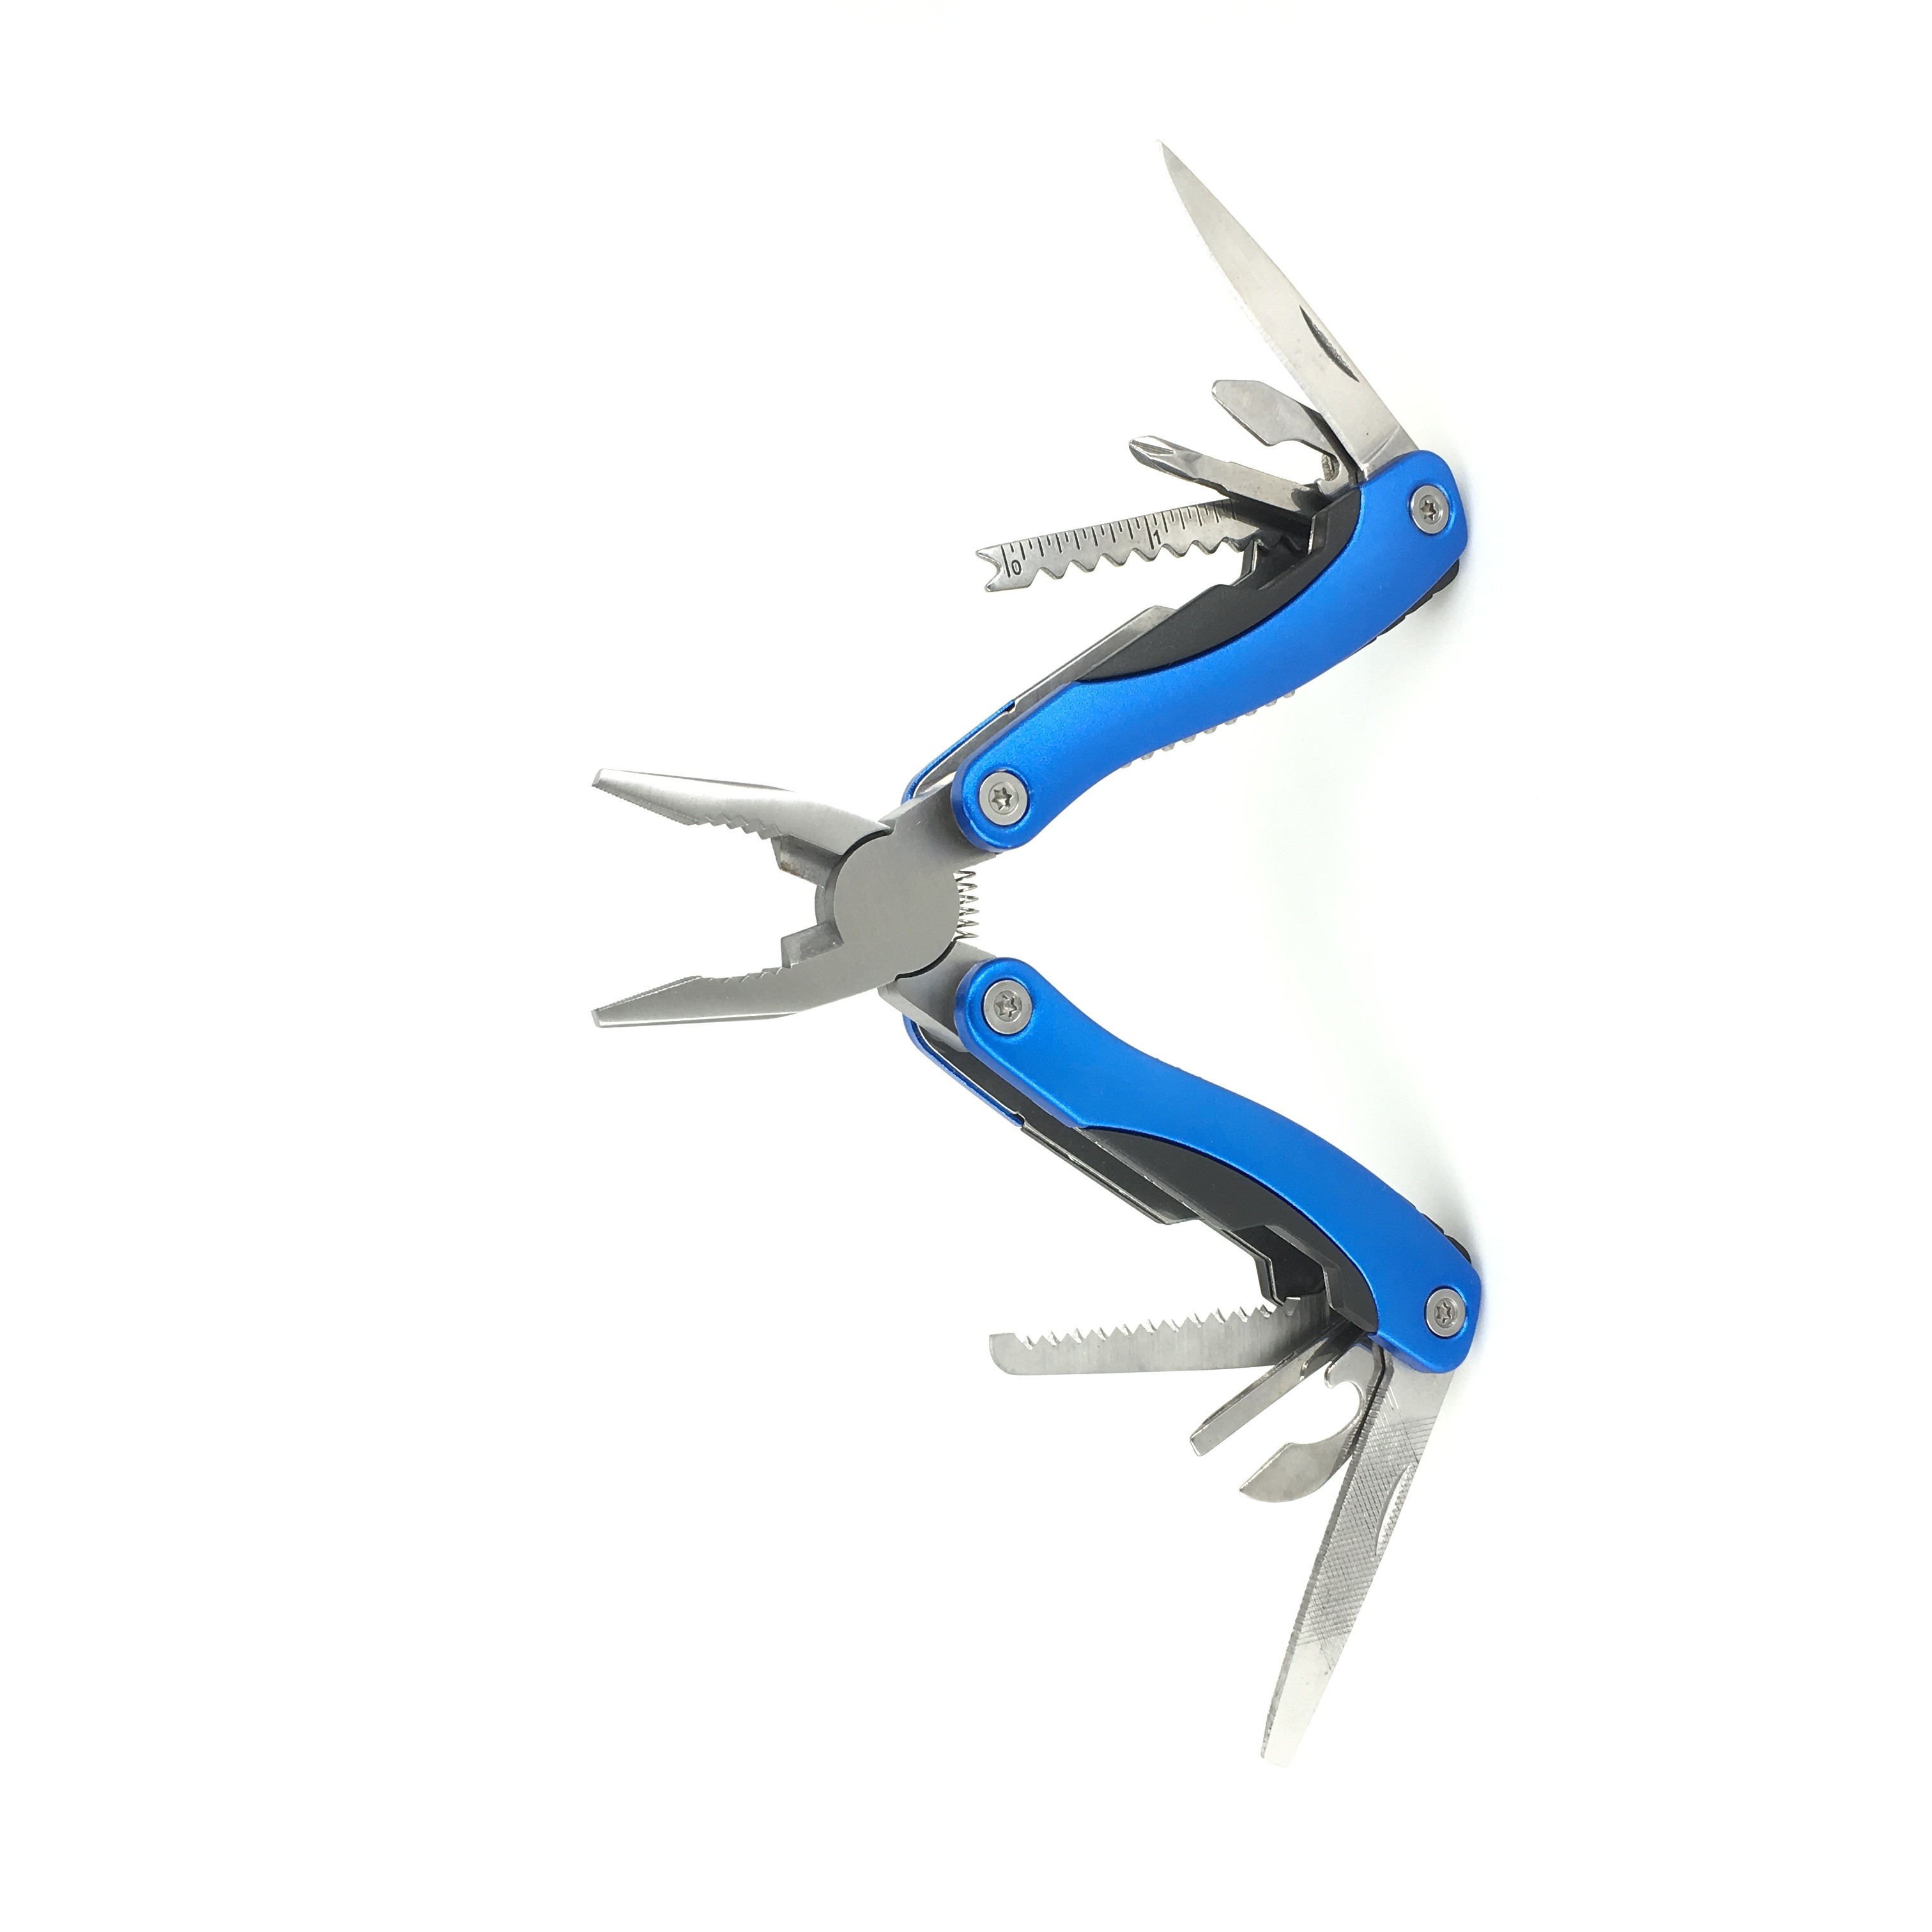 12-in-1 Anodised 	Aluminium Folding Multi Multitool Pocket Pliers with Pouch Packing